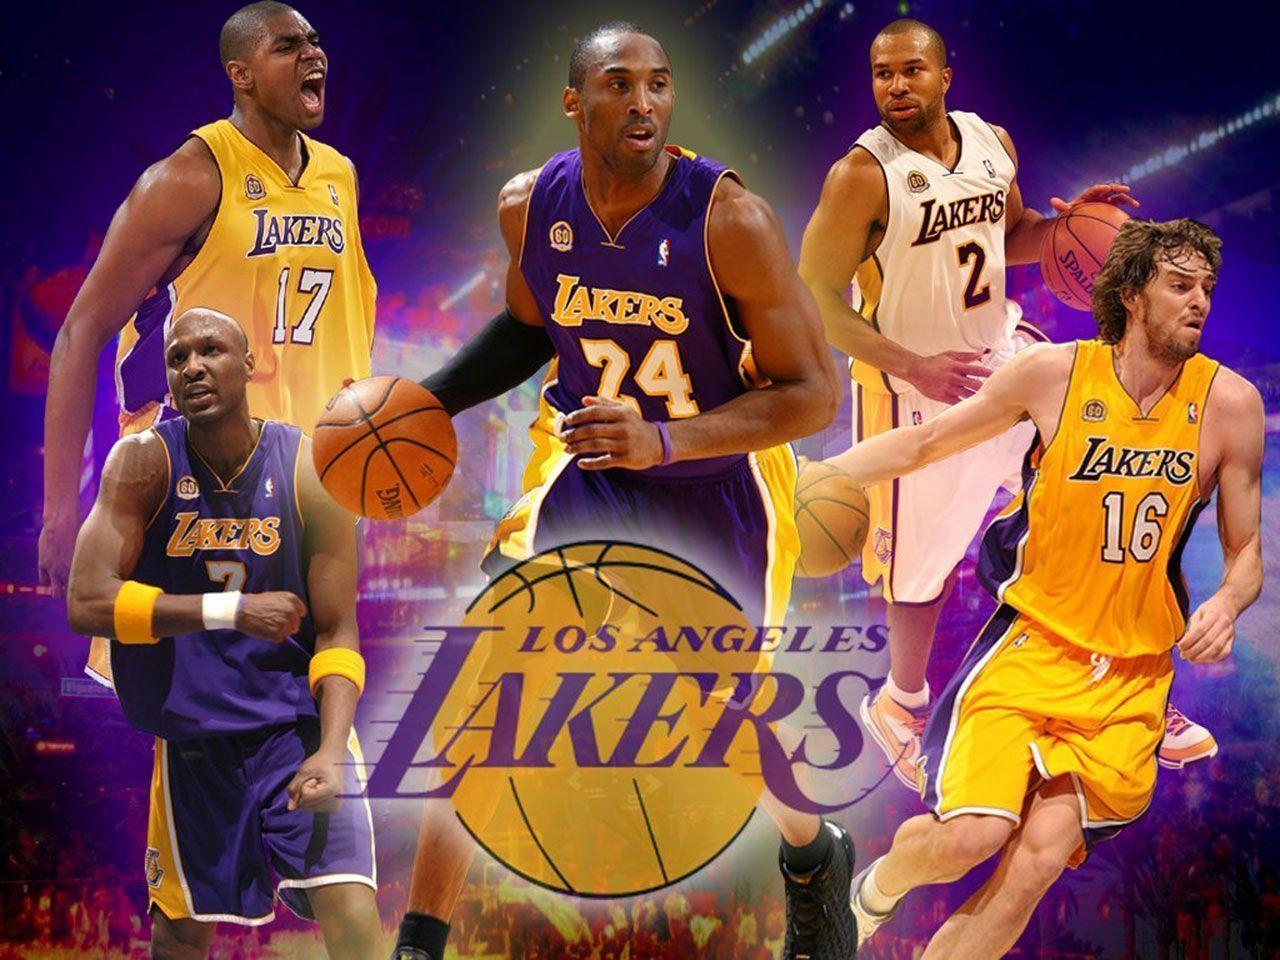 Los Angeles Lakers Wallpapers HD 14 25151 Image HD Wallpapers